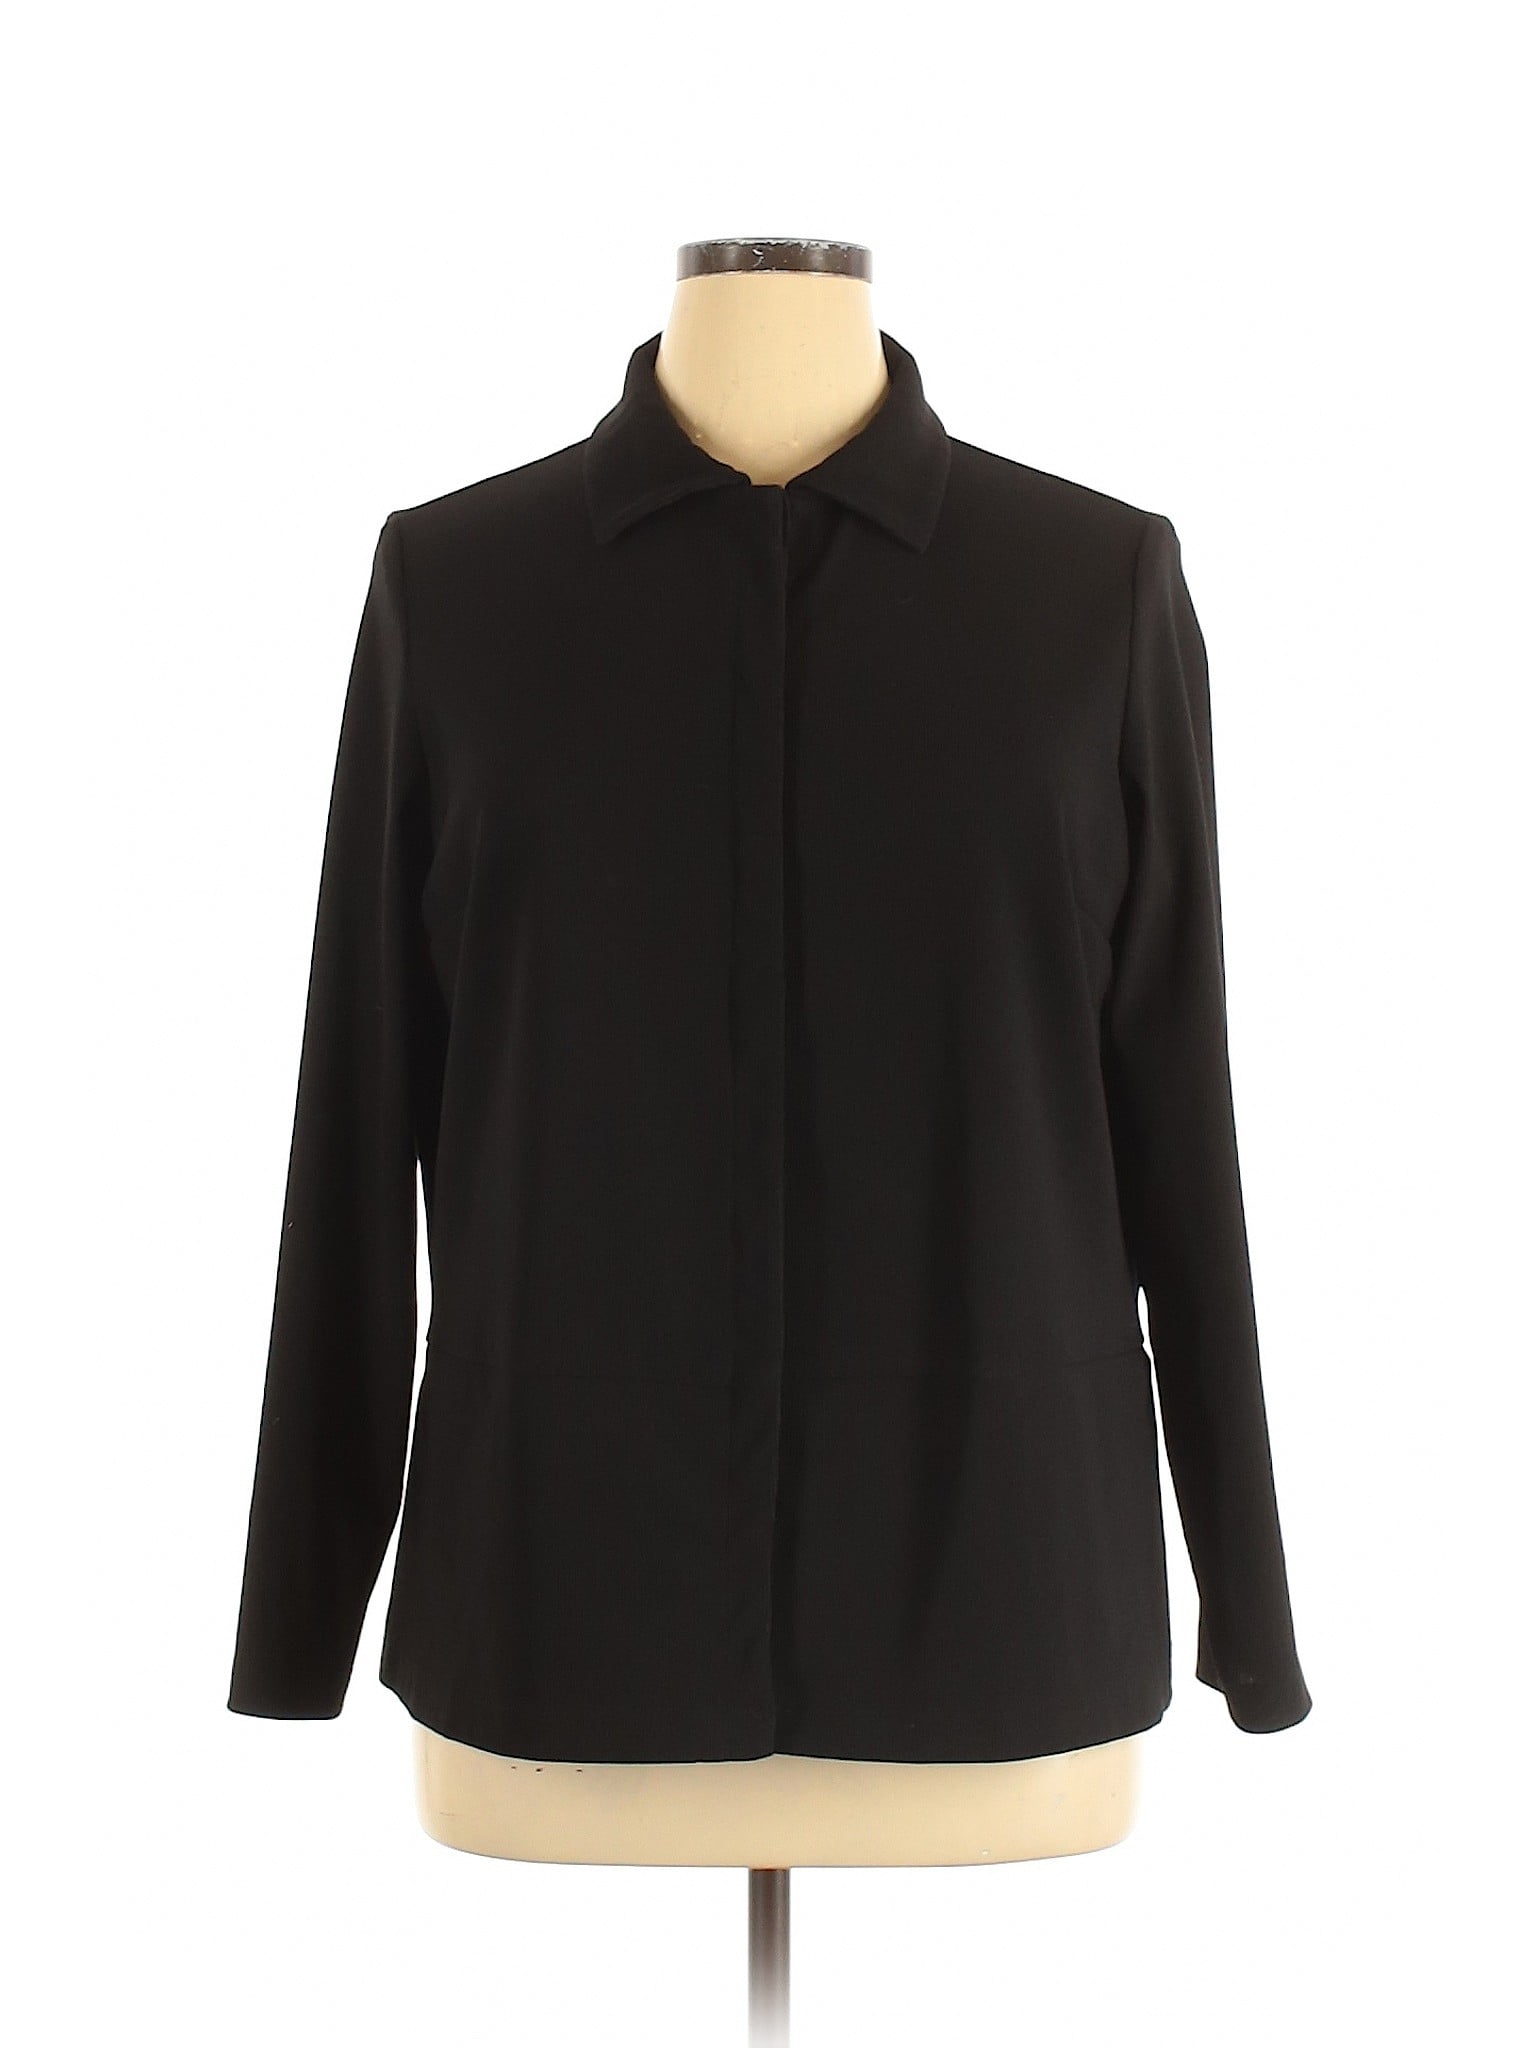 TravelSmith - Pre-Owned Travelsmith Women's Size XL Long Sleeve Button ...